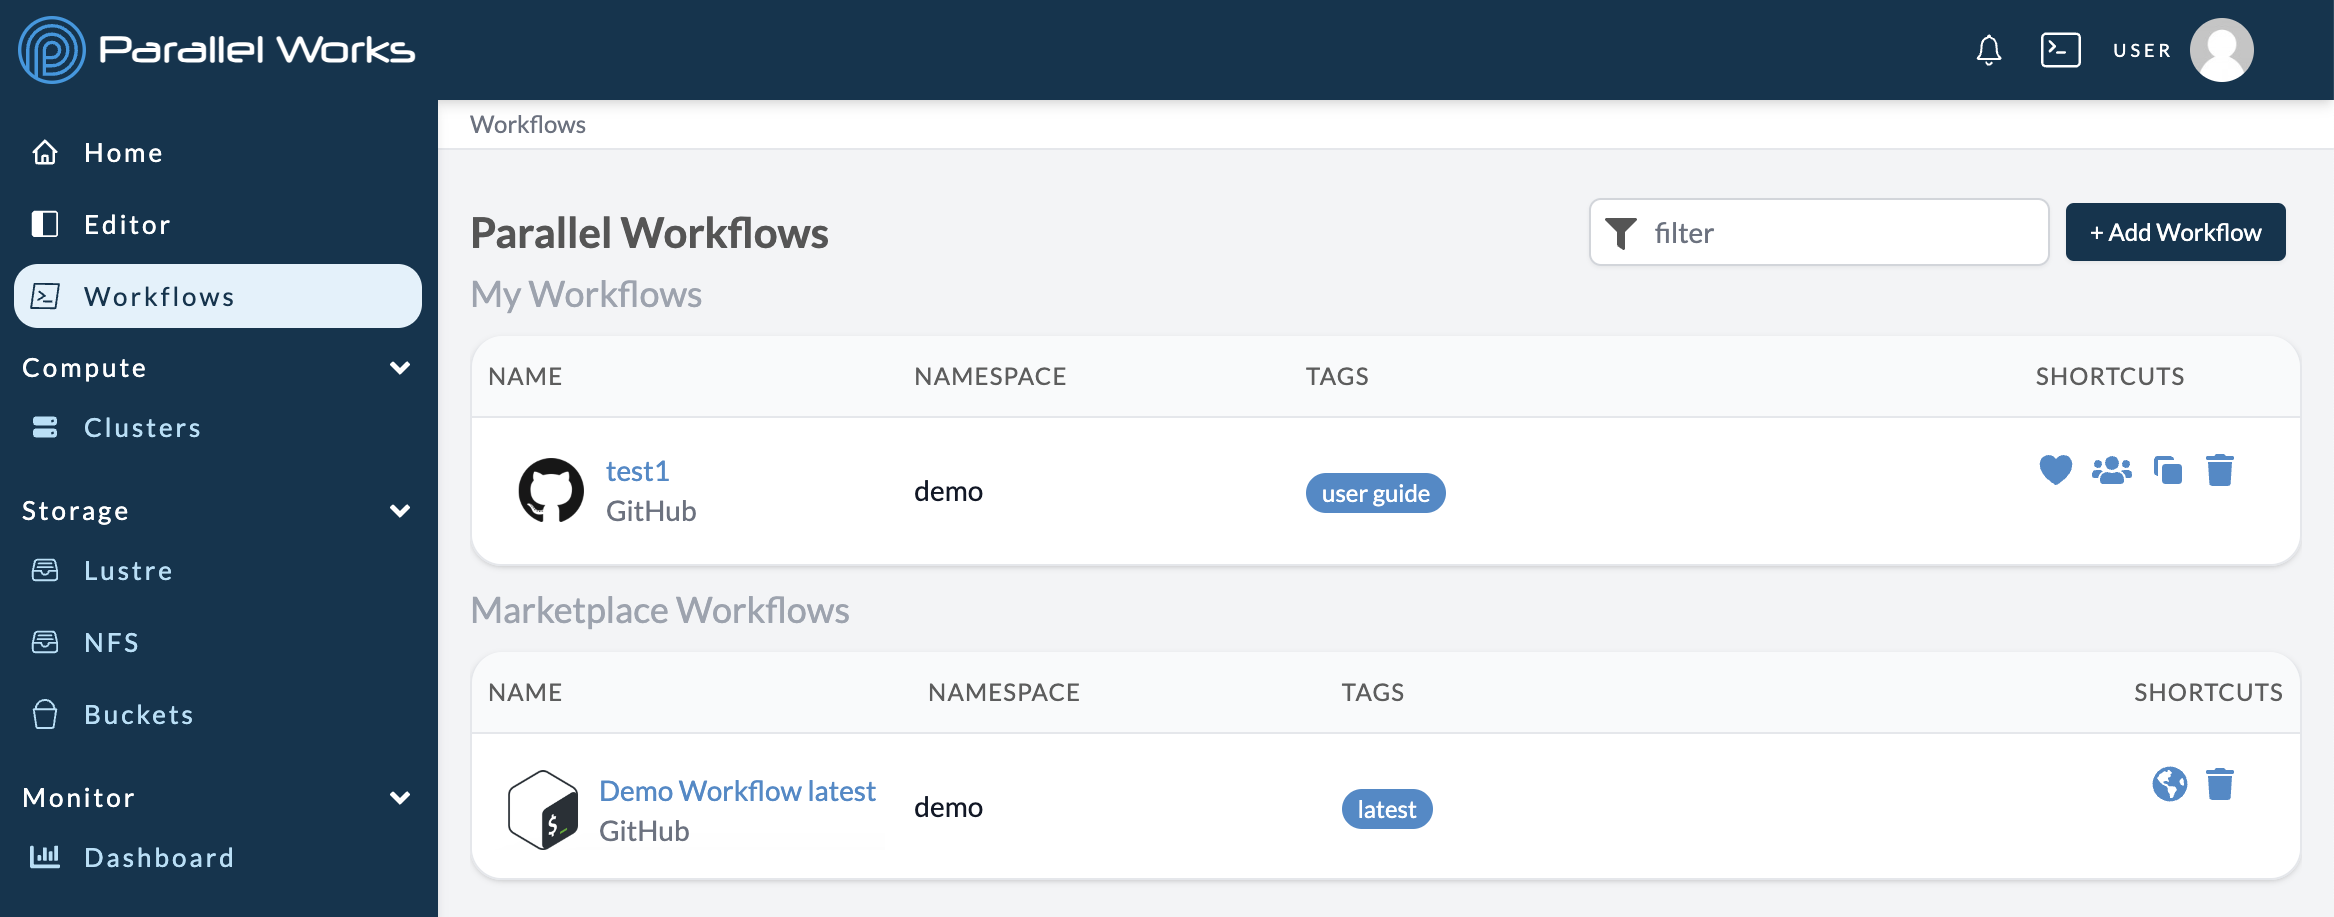 Screenshot of the user selecting the recently added workflow on the Workflows page.